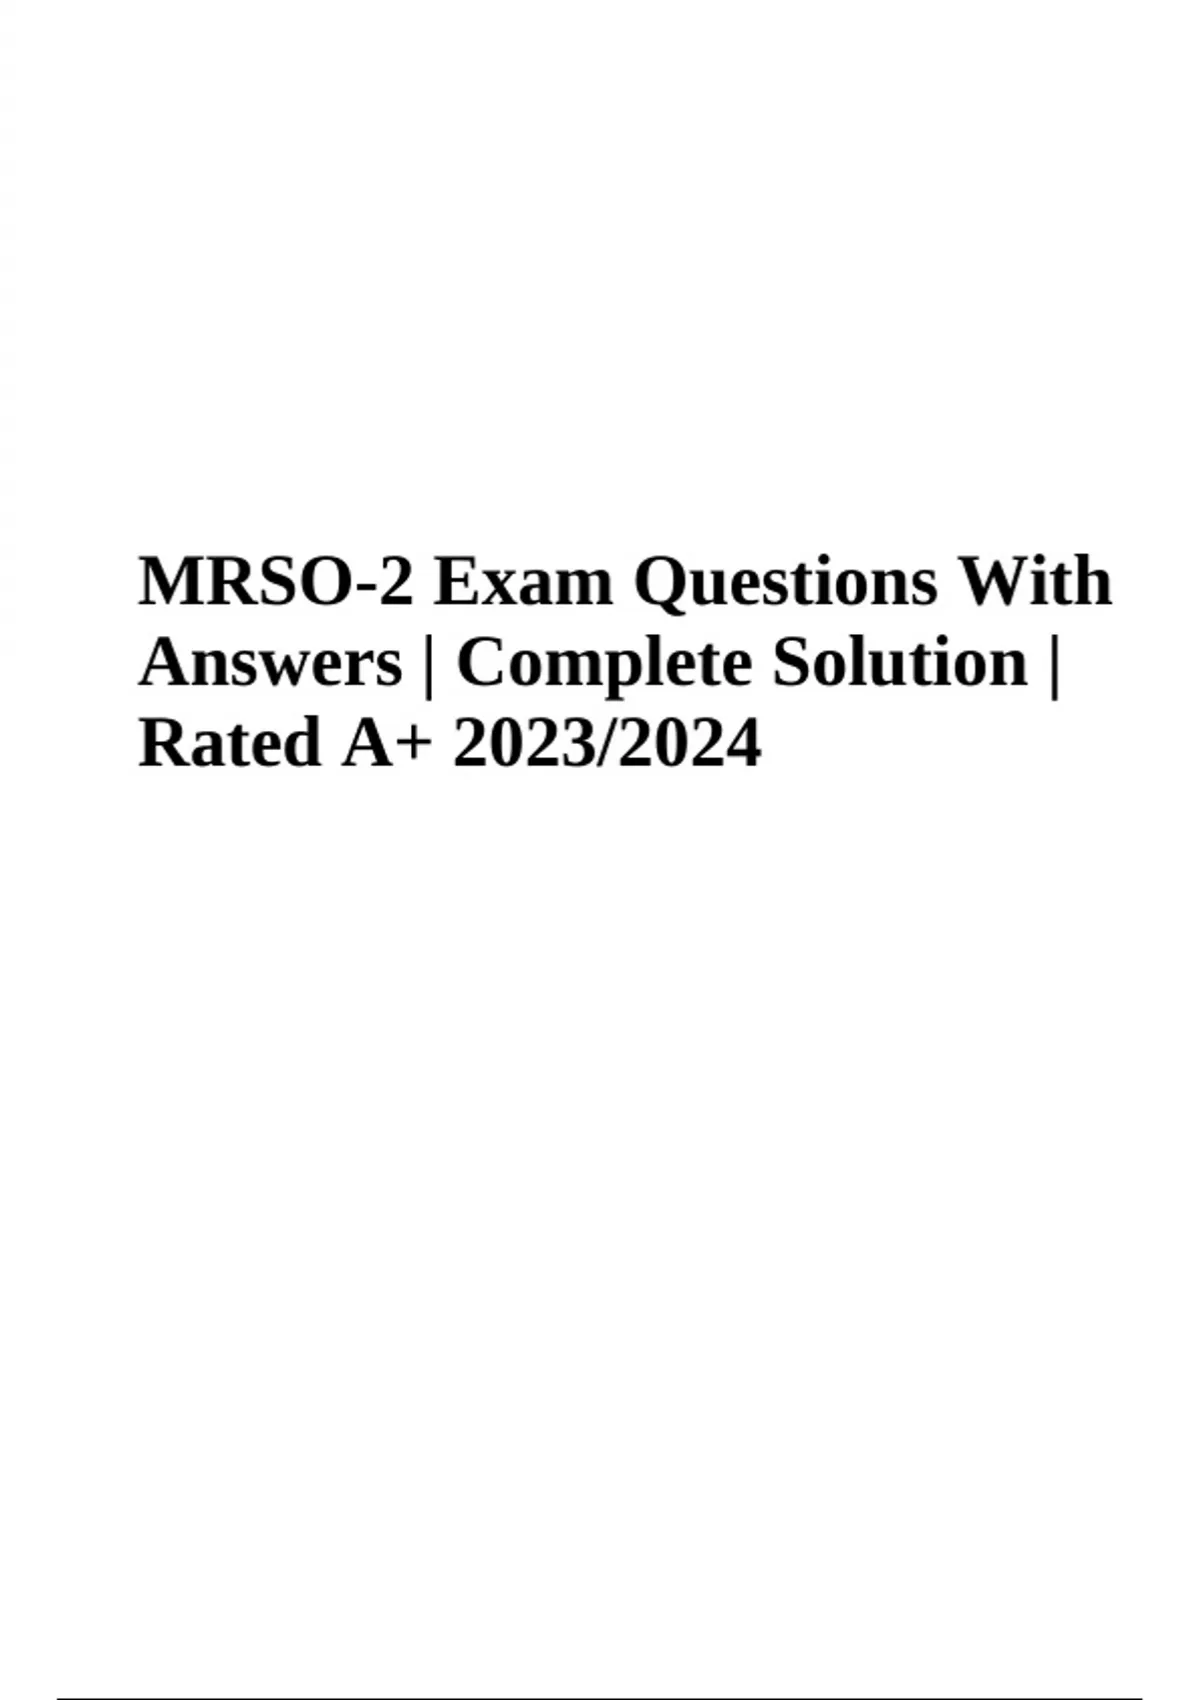 MRSO Exam Questions and Answers (Latest Graded A+ 2023/2024 ) MRSO